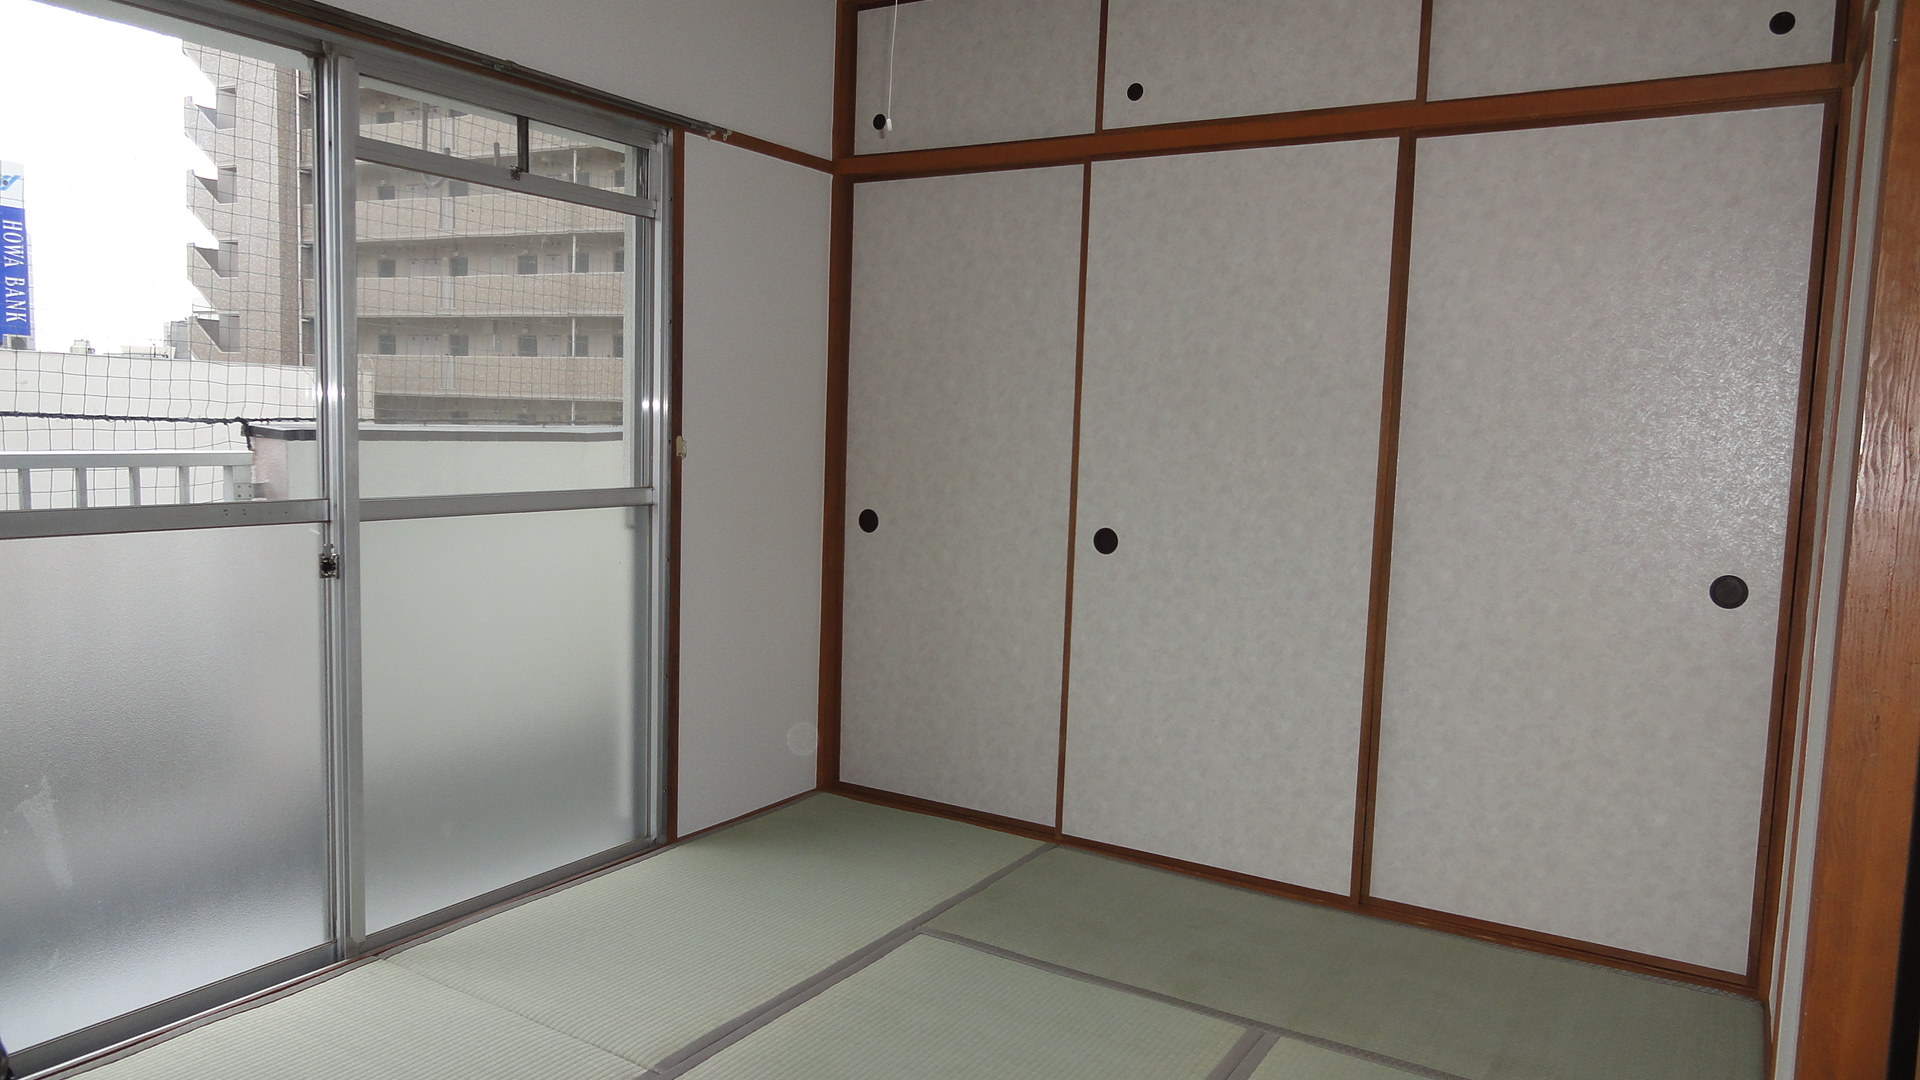 Living and room. It is a tatami mat and wallpaper of the new.